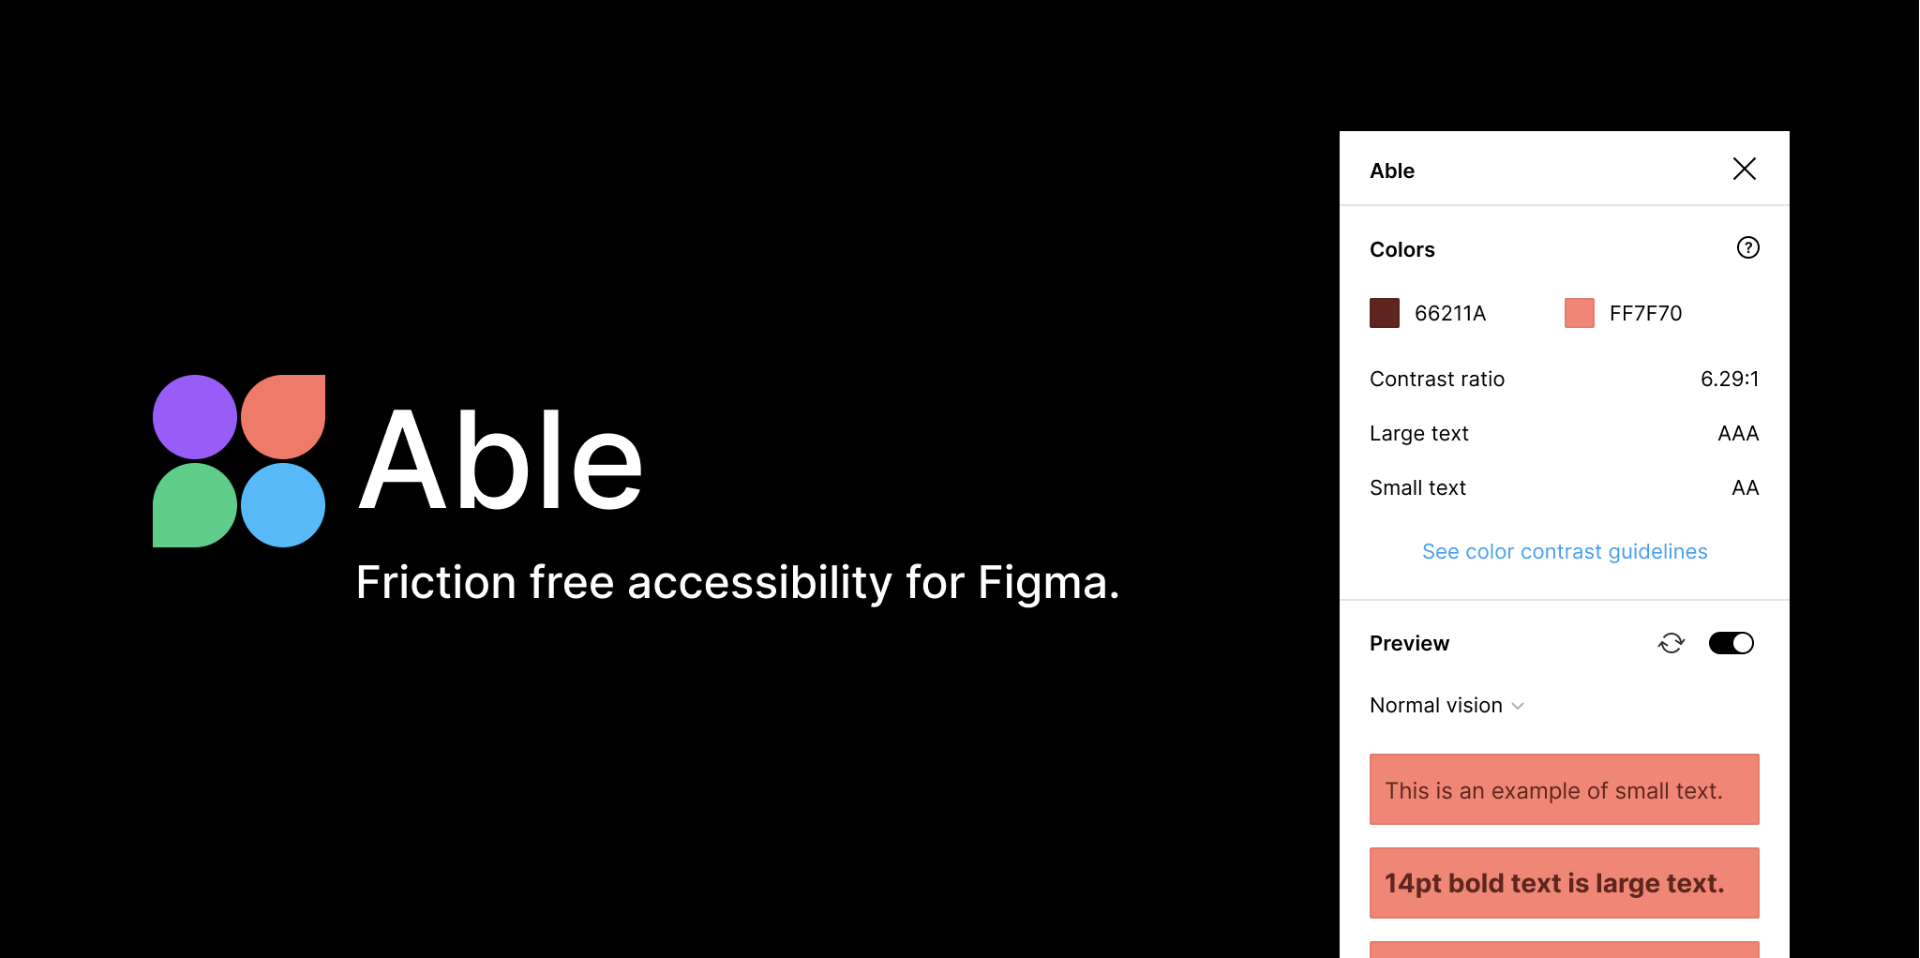 A screenshot of the website Able with the tagline "friction free accessibility for Figma" there is an pop-up box stating the colors and contrast ration, and previews the background and text color.